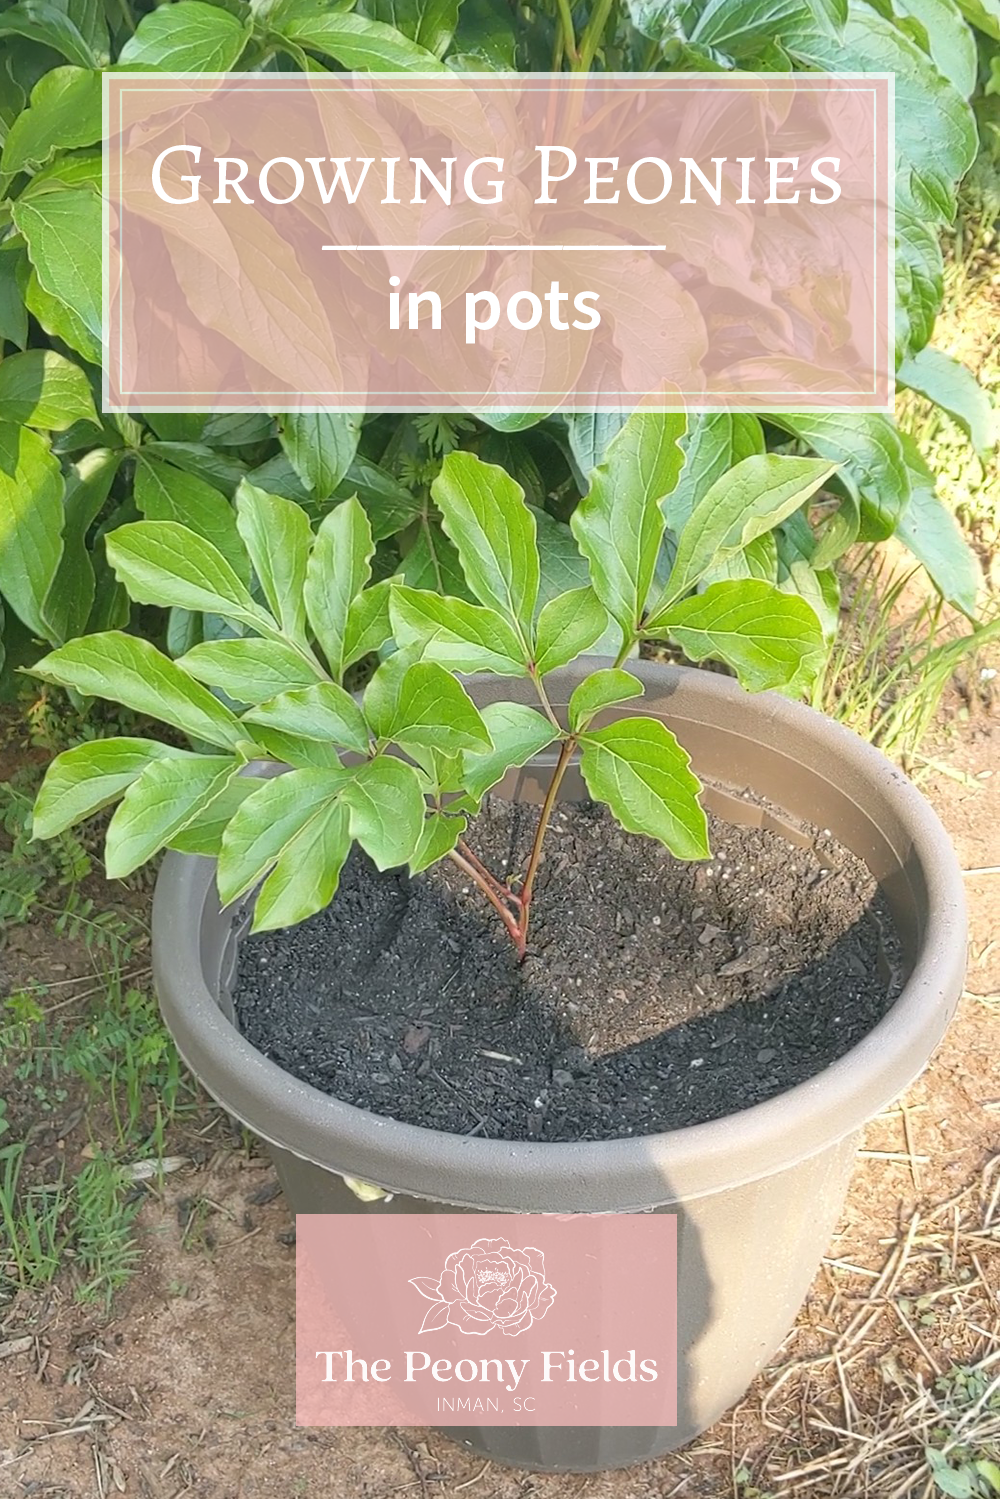 A peony plant grows in a flower pot.